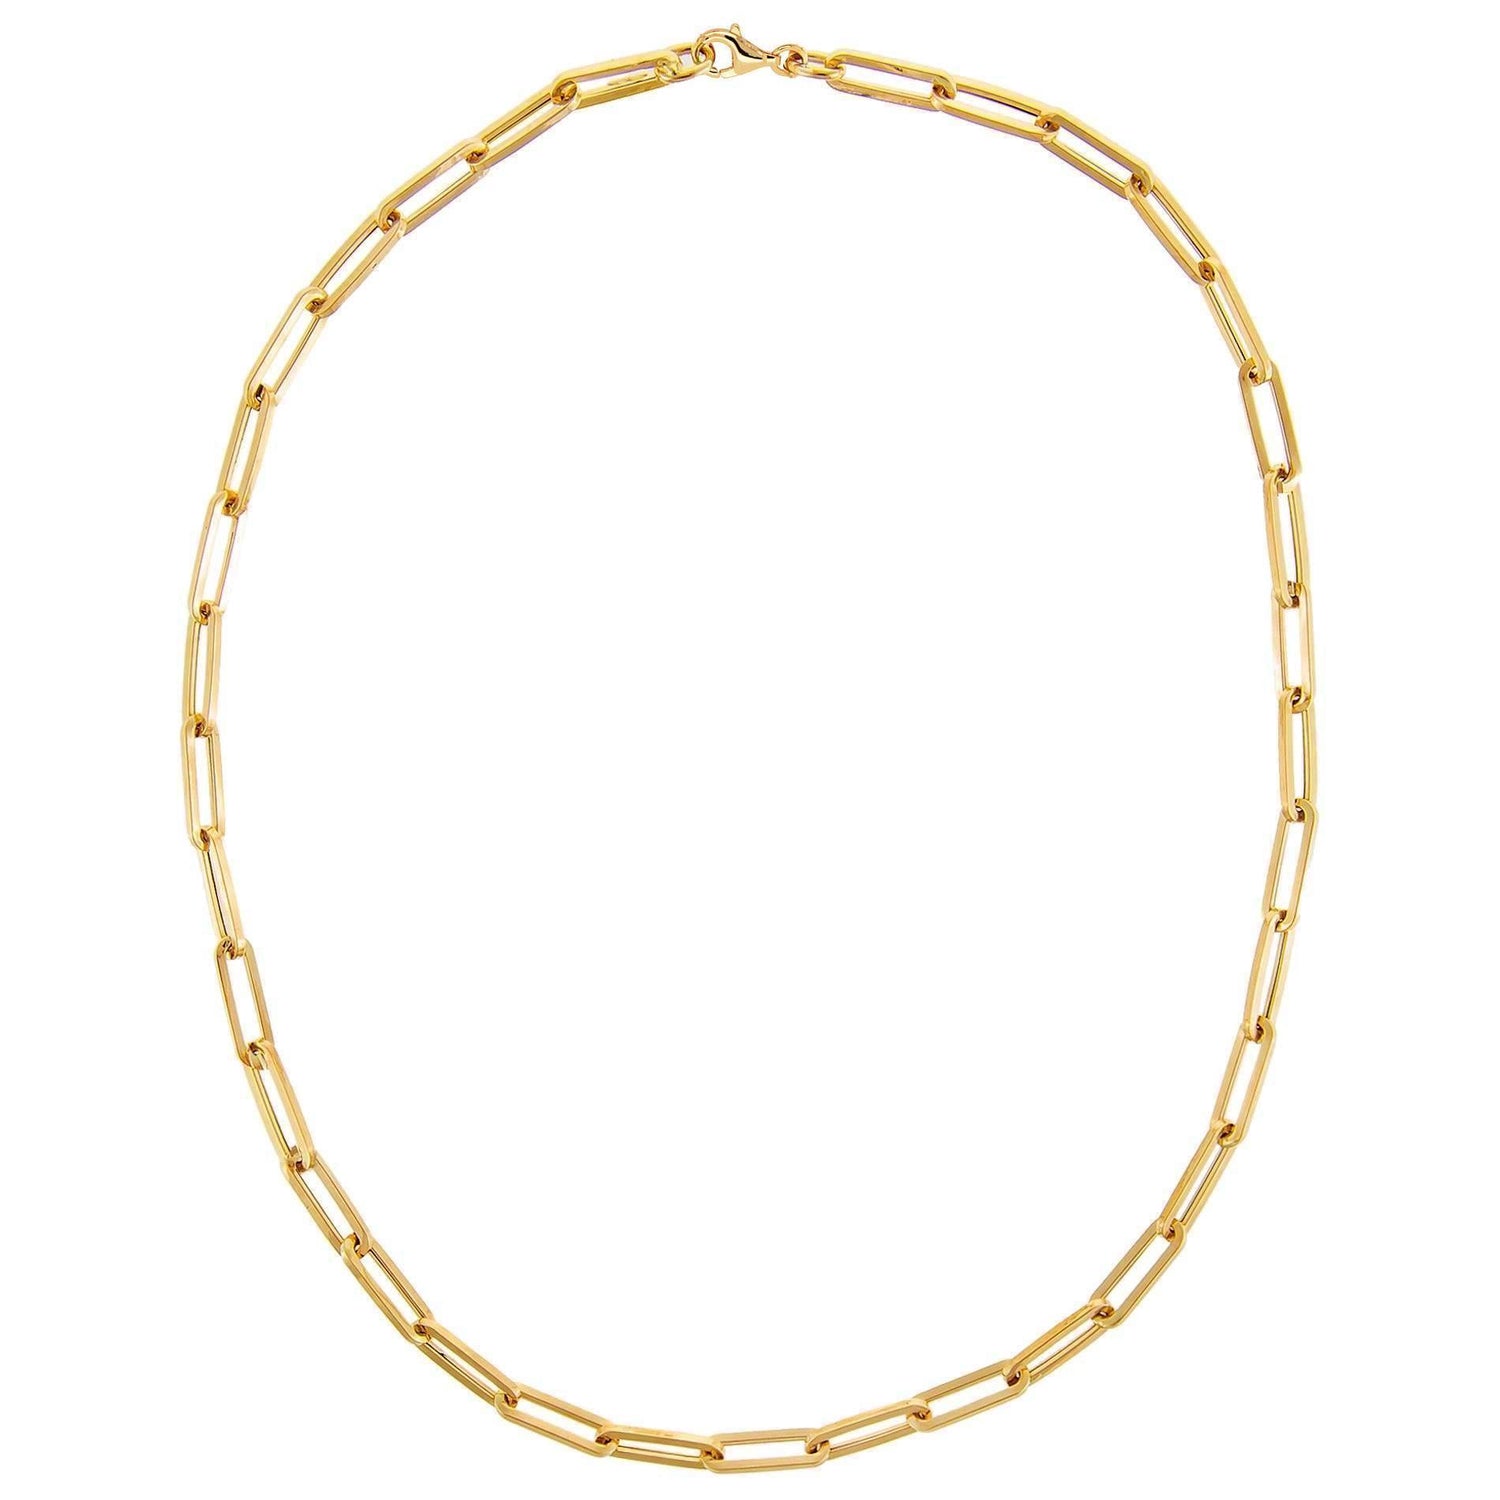 Circle Lock Chain Bracelet or Necklace Thick Gold Necklace or Bracelet  Circle Lock Chain Thick Gold Chevron Chain Gold Necklace 